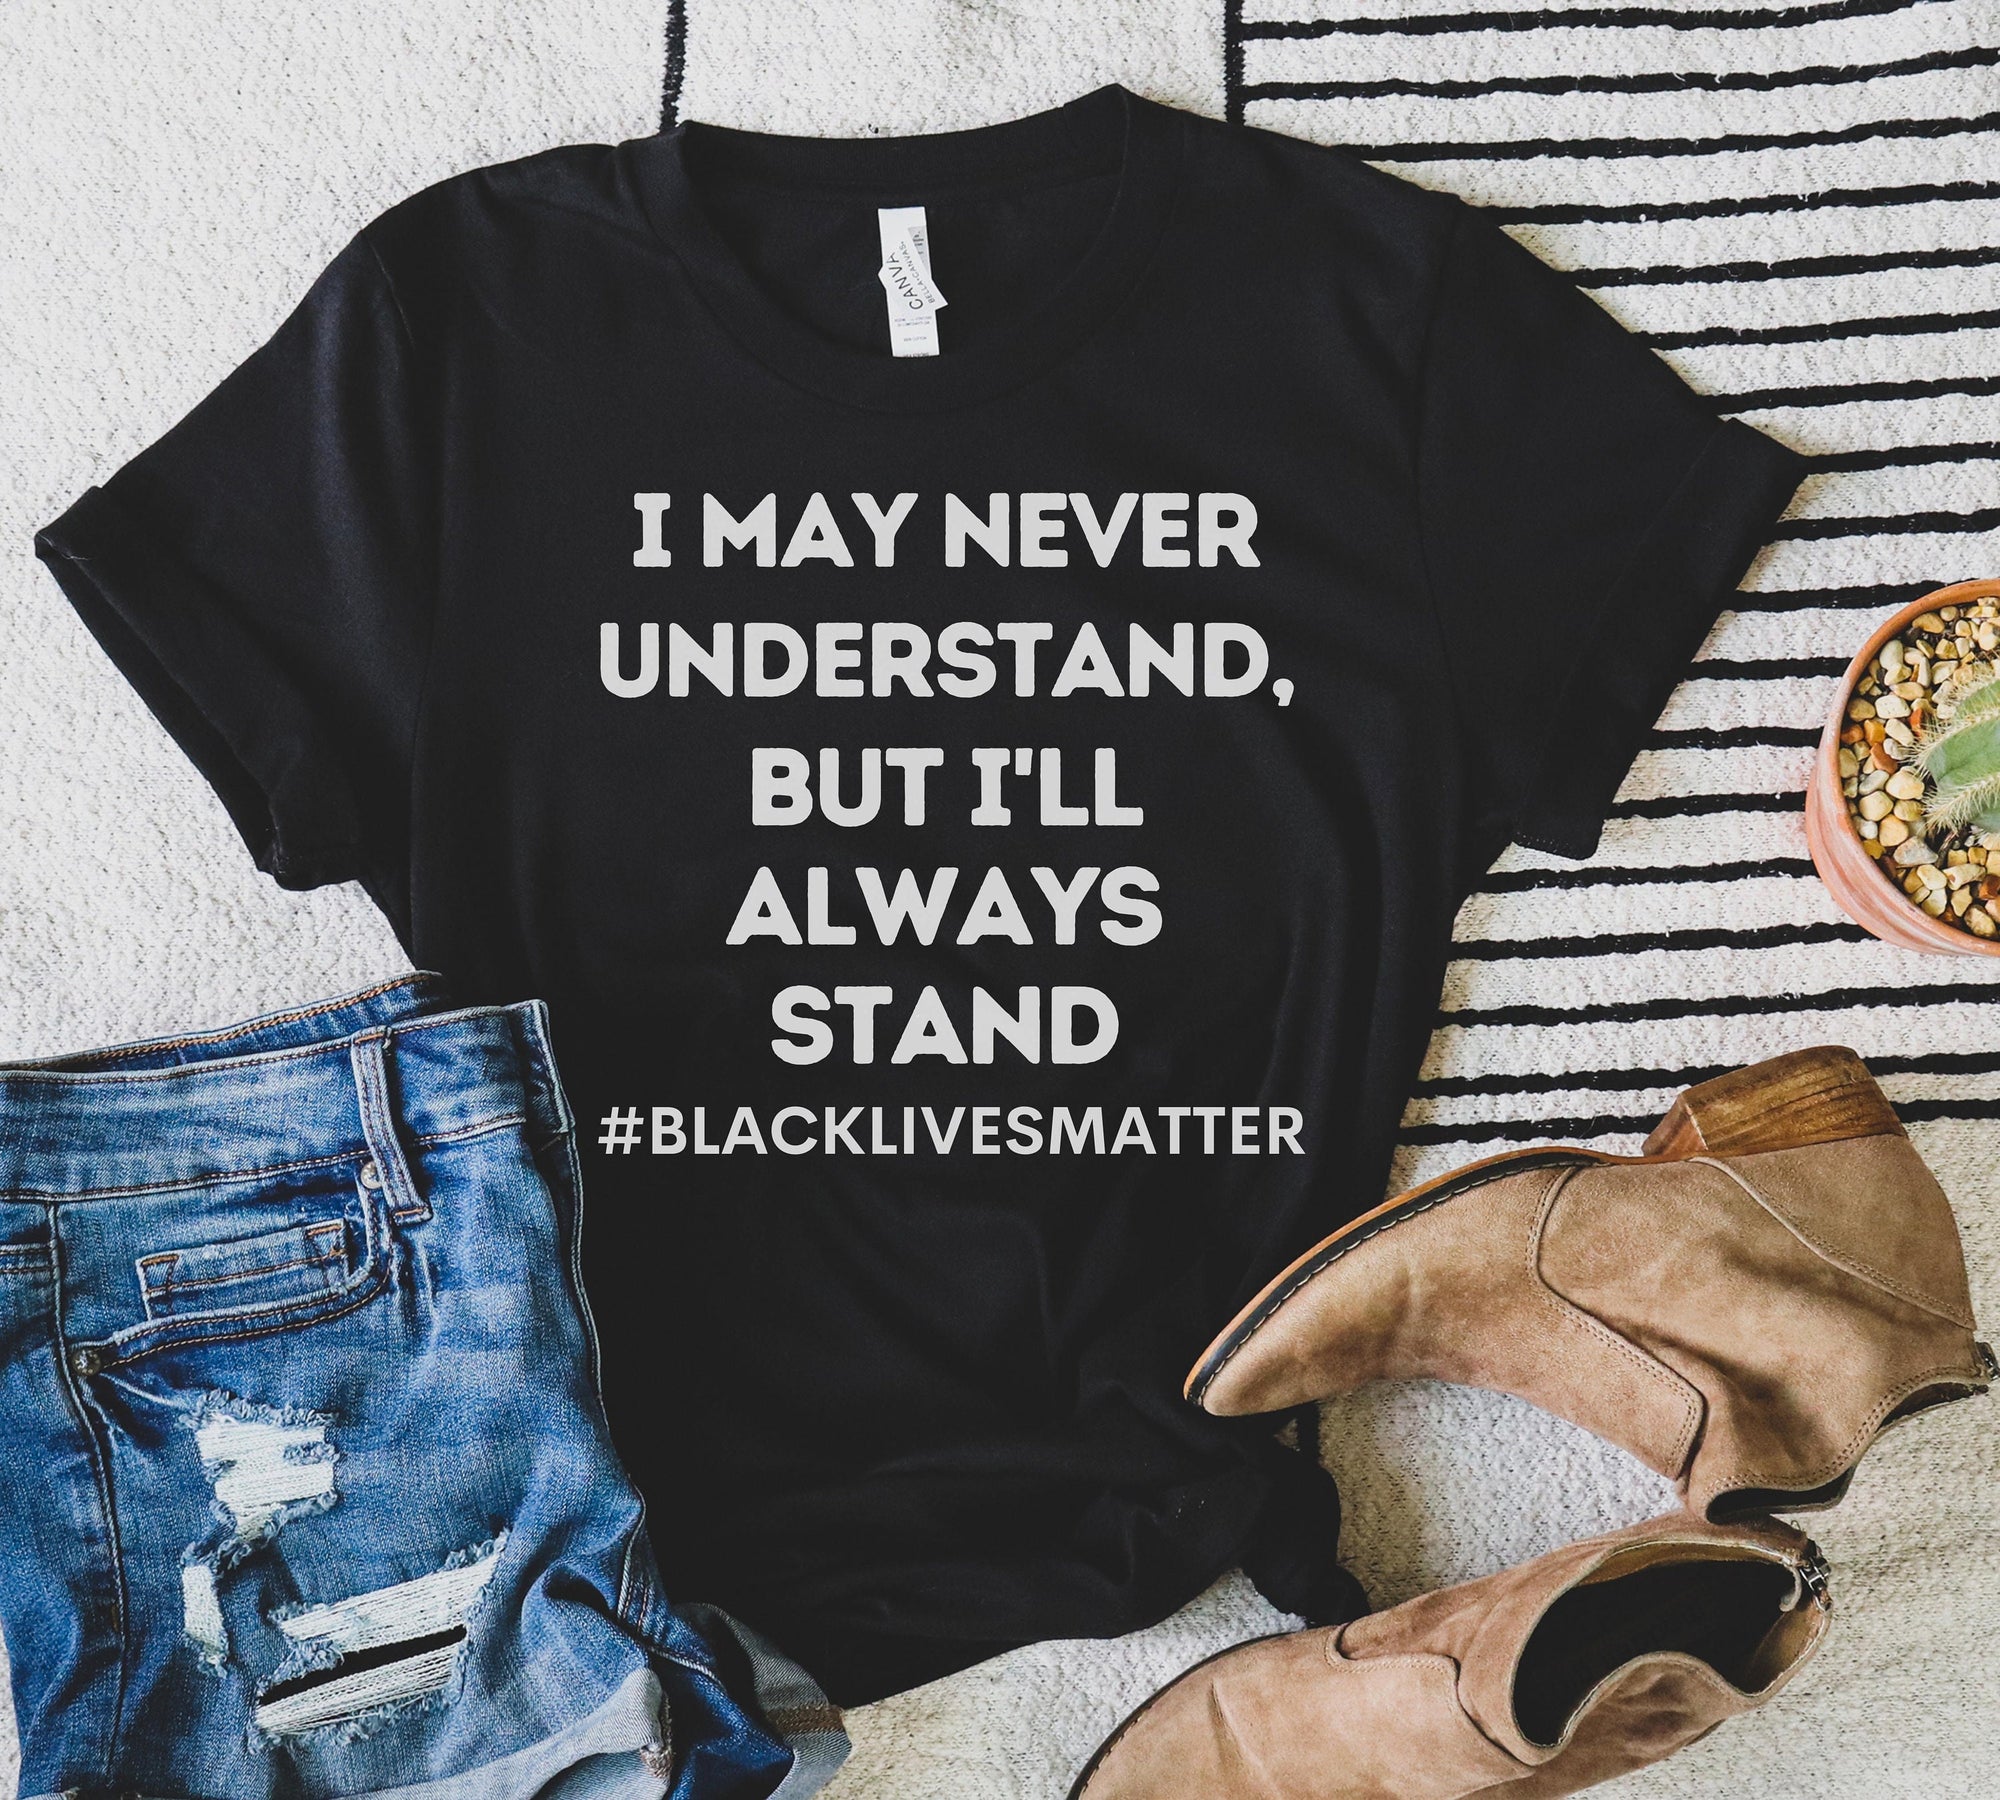 BLM Ally Shirt Ally AF Black lives matter Ally shirt I stand with you tshirt Anti Racism Equality Civil Rights Tee Plus Unisex